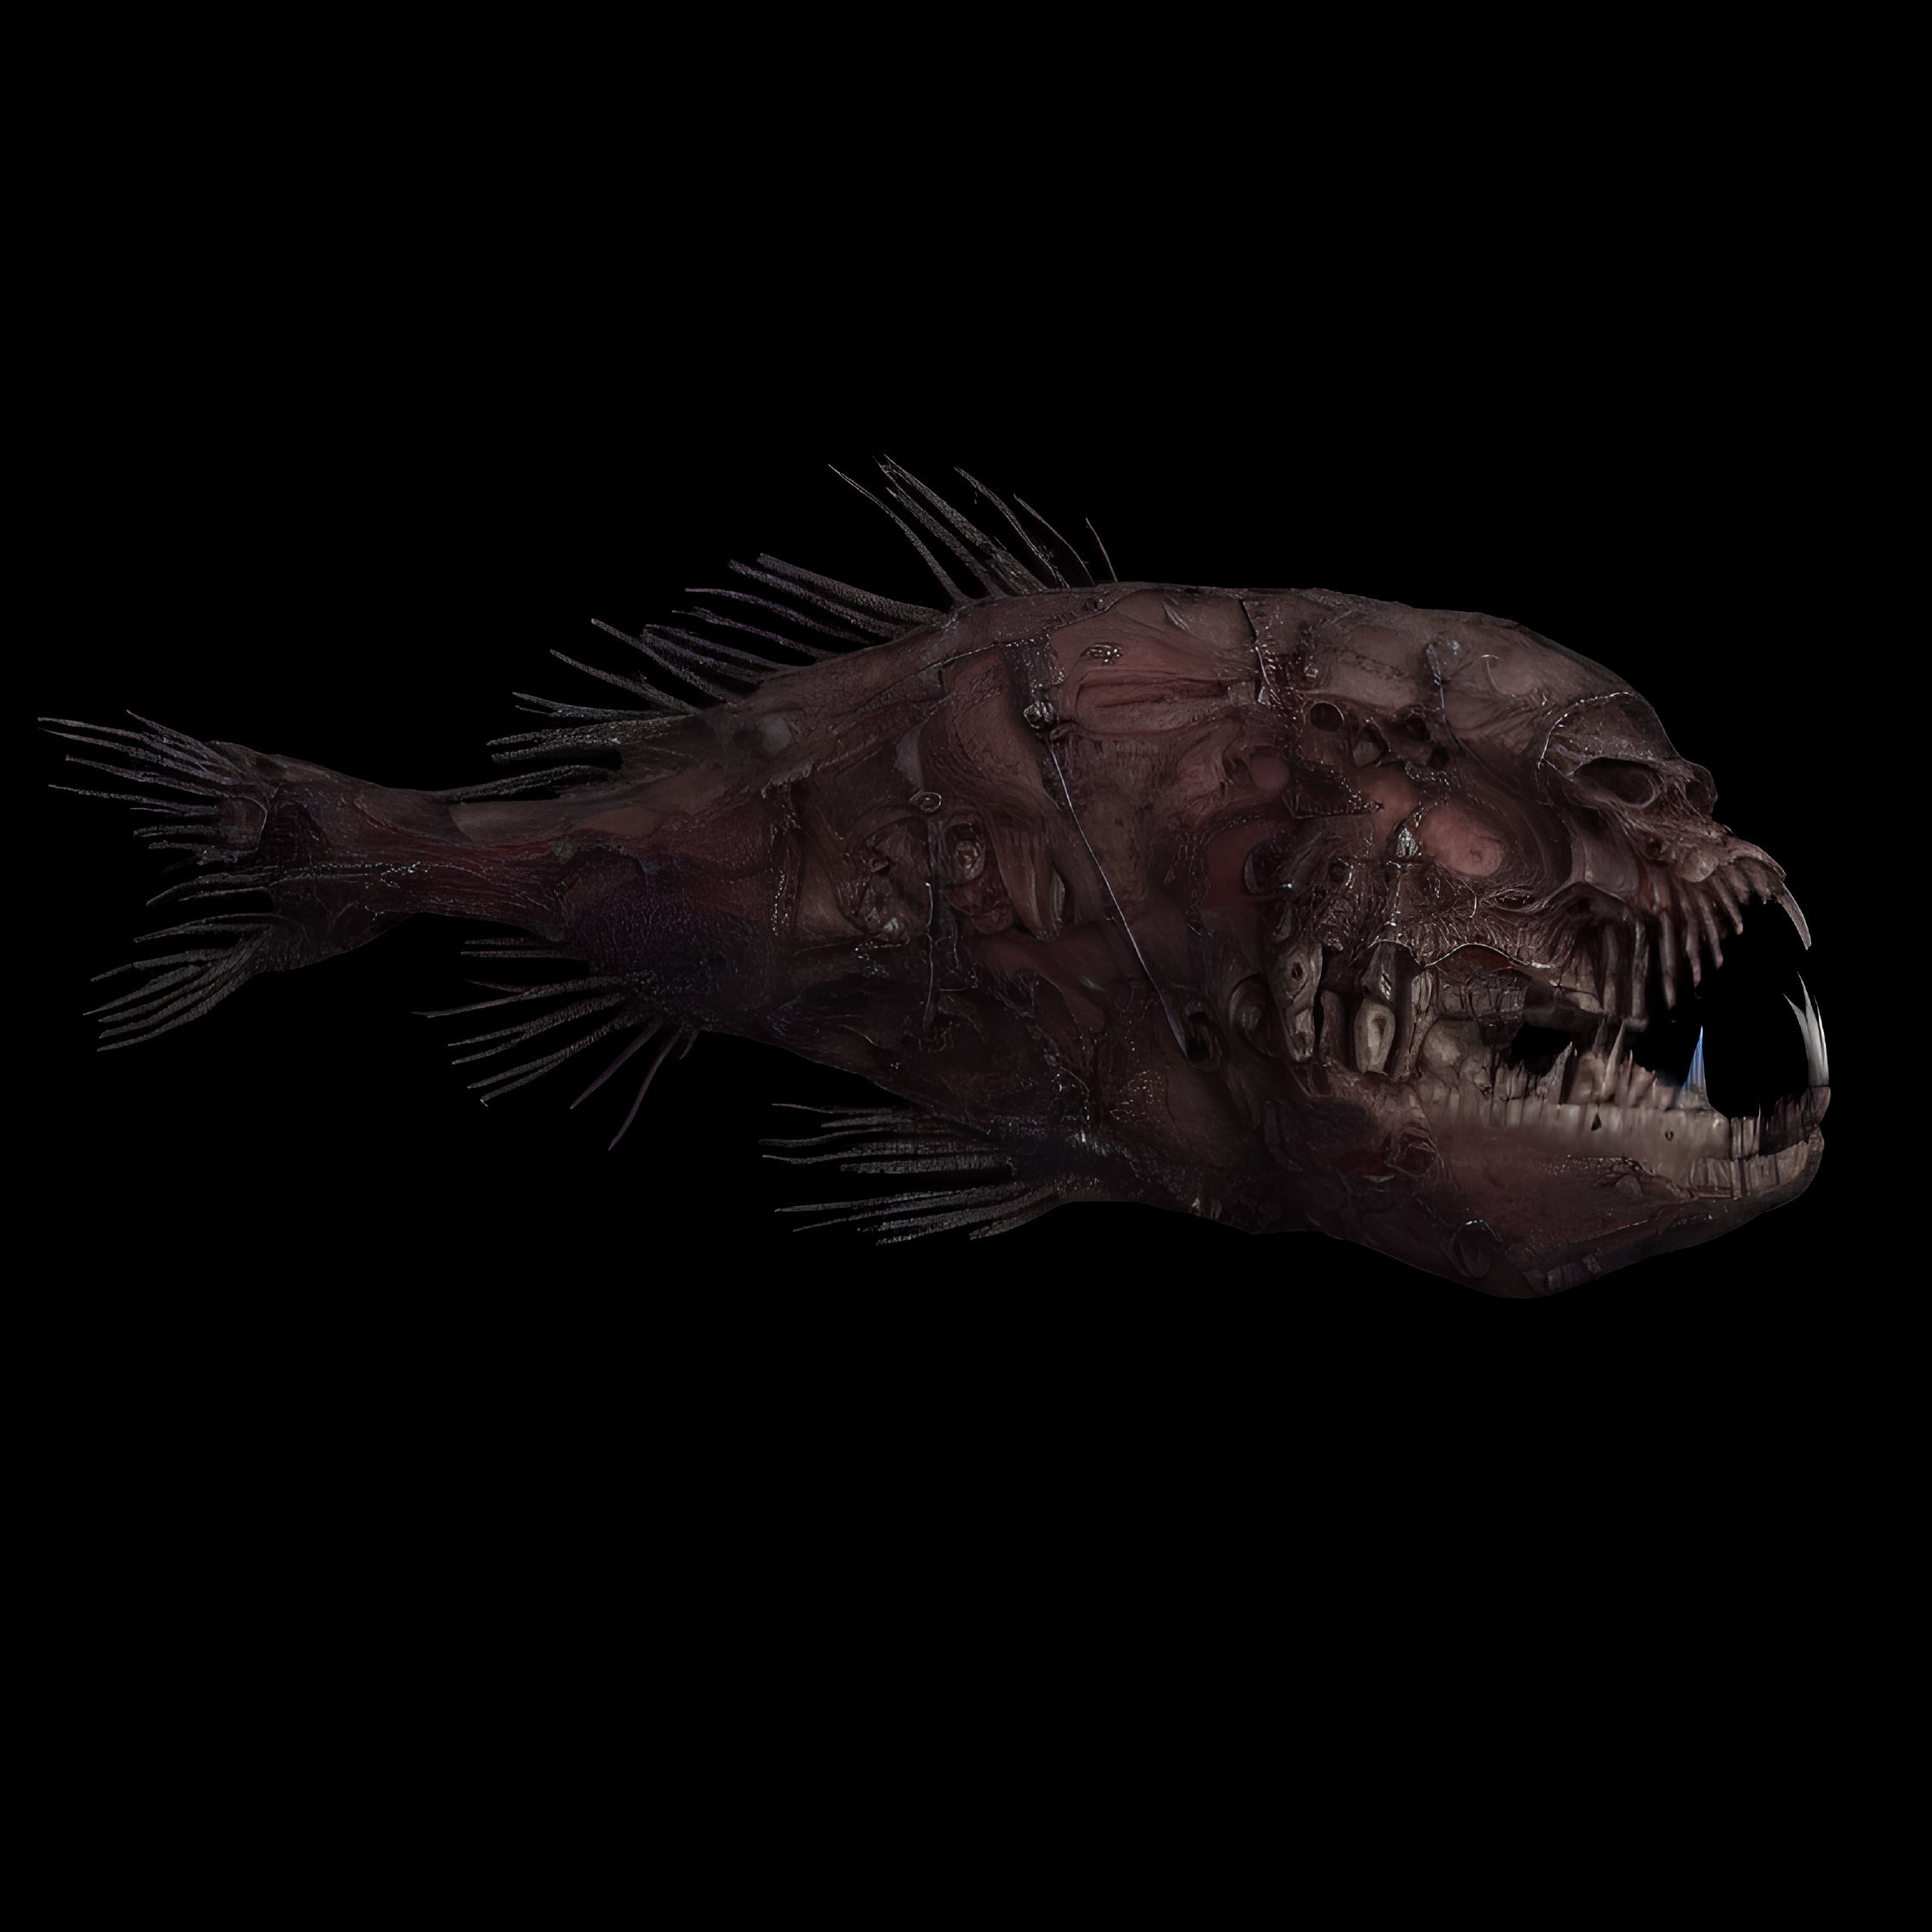 Grotesque deep-sea fish with sharp teeth and spiny fins on black background